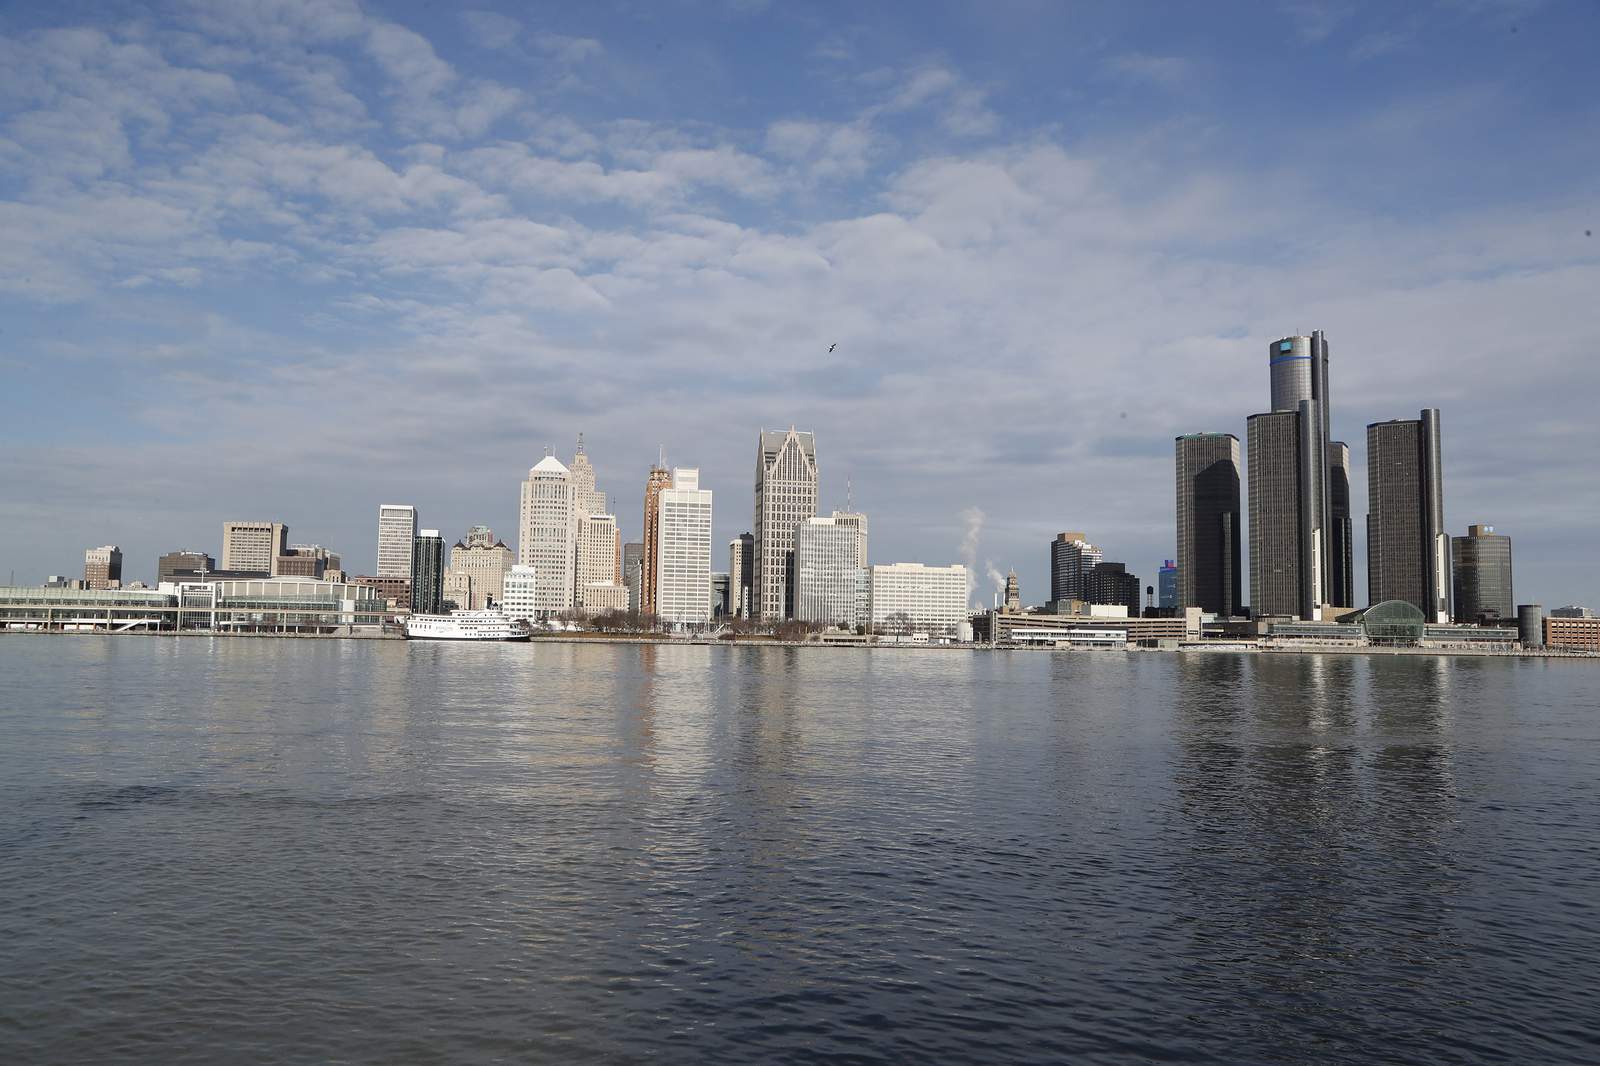 Detroit to start yearlong celebration of arts and culture